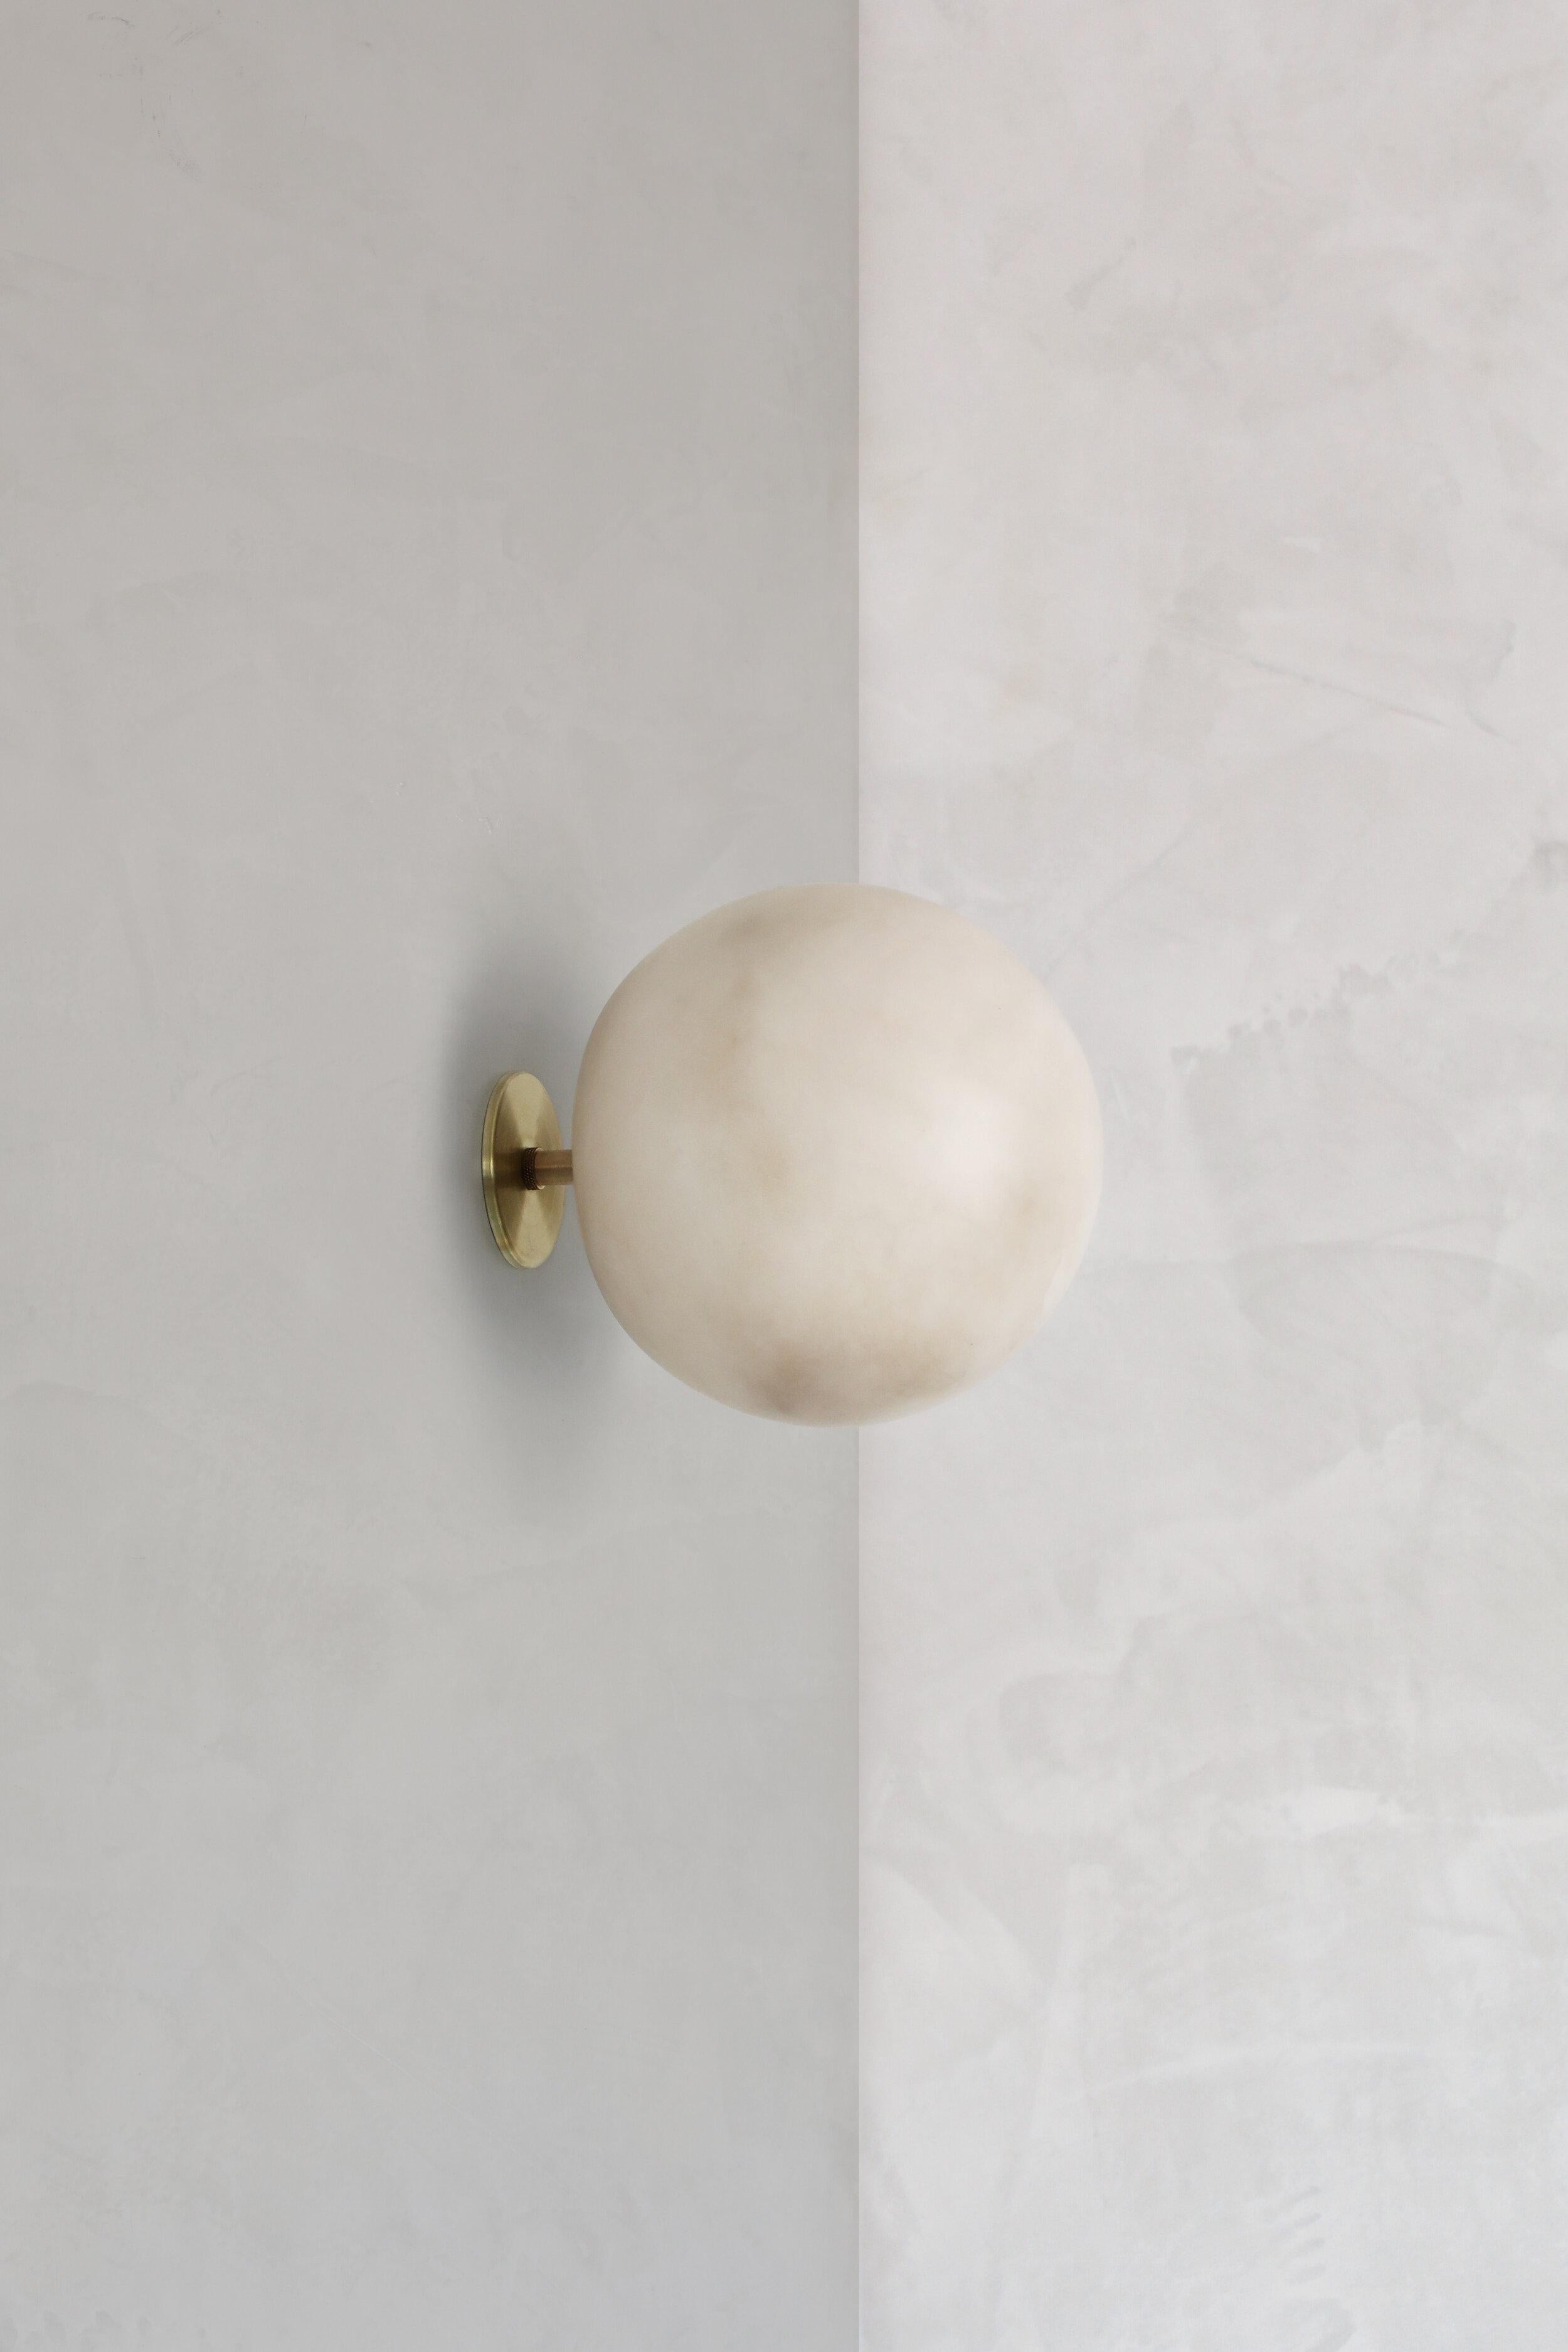 Planette Wall 18 Alabaster Wall Light by Contain
Dimensions: Ø 18 x H 22 cm.
Materials: Alabaster and brass.

Also available in different finishes and dimensions (Ø12 cm / Ø16,5 cm / Ø18cm). Please contact us.

All our lamps can be wired